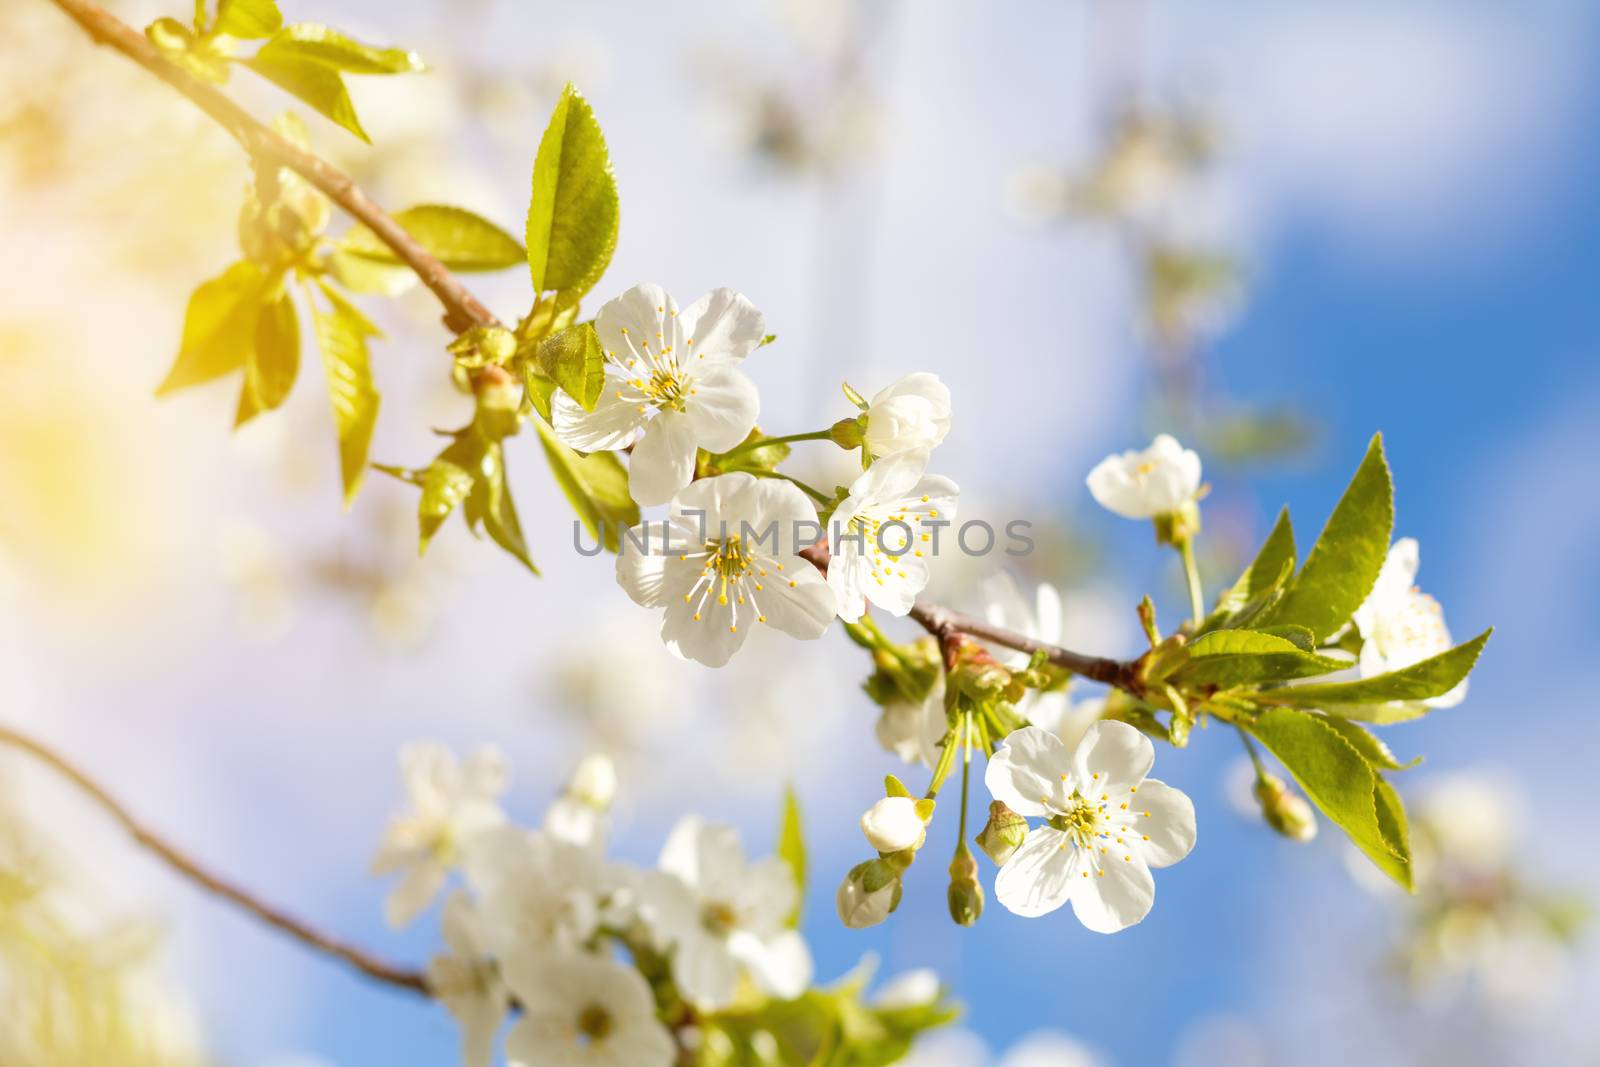 Spring background art with white cherry blossom. Beautiful nature scene with blooming tree. Sunny day. Spring flowers. Beautiful orchard. Abstract blurred background. Shallow depth of field.